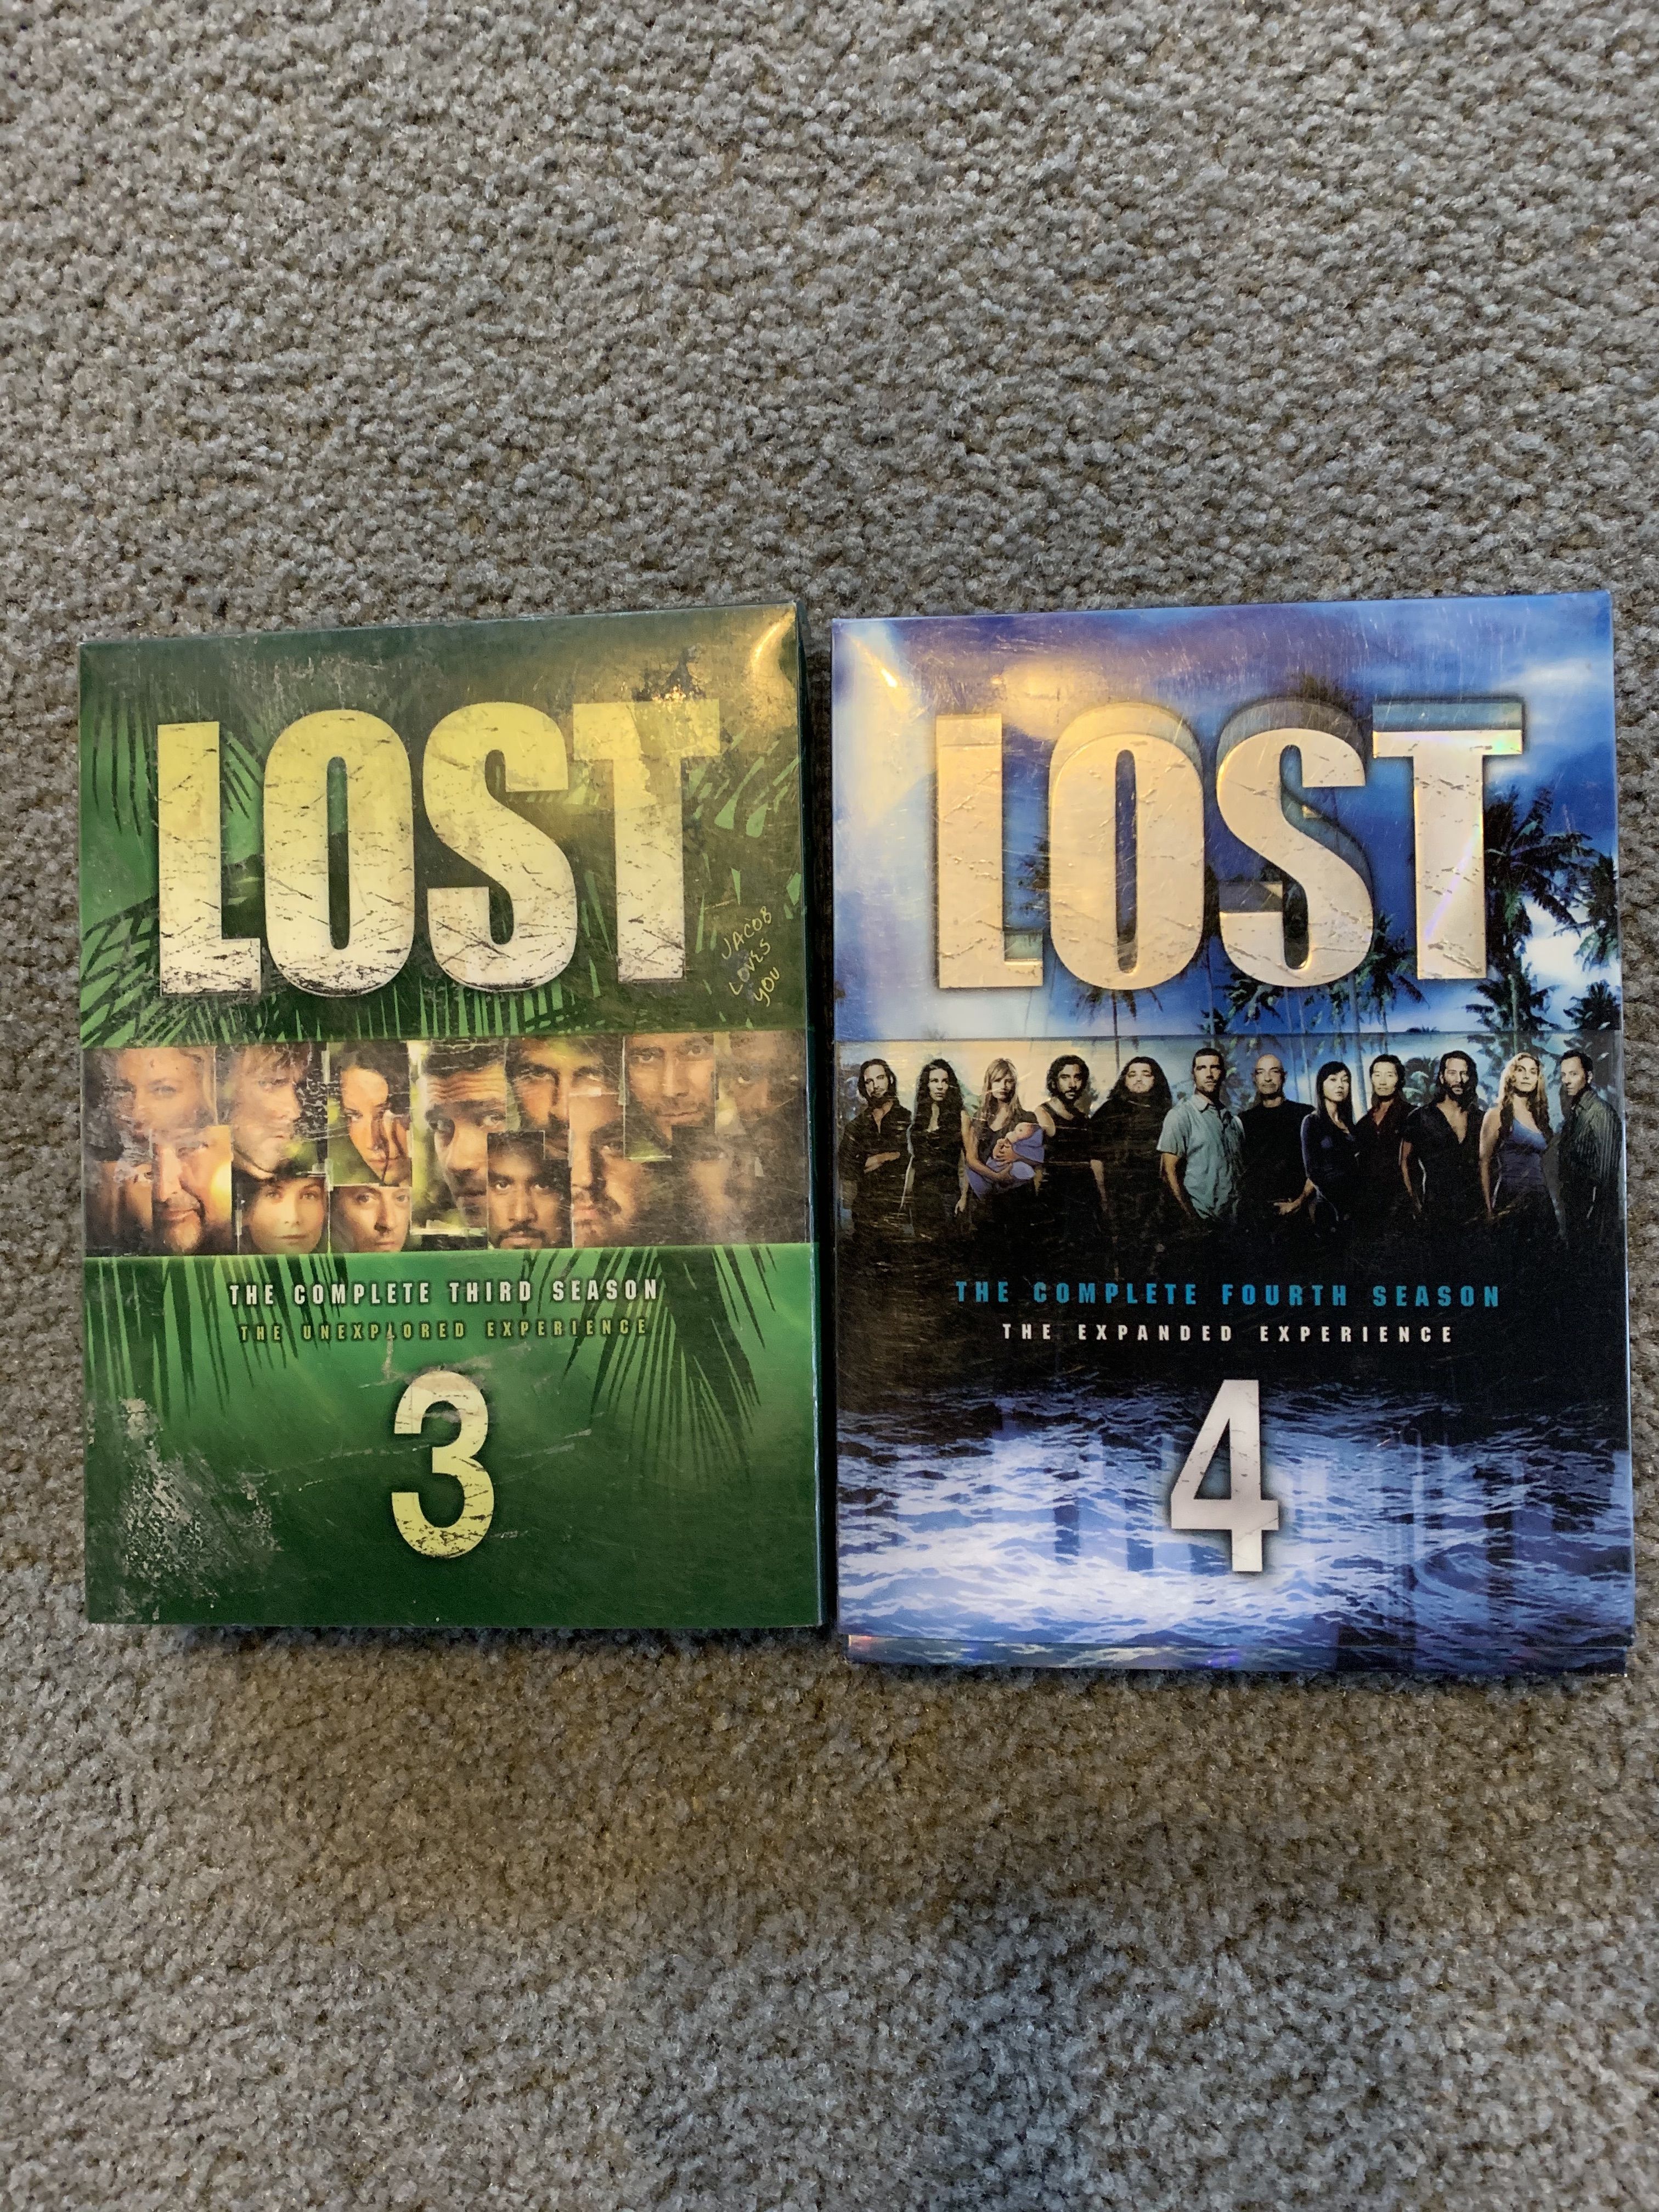 The Show Lost Seasons 3 and 4